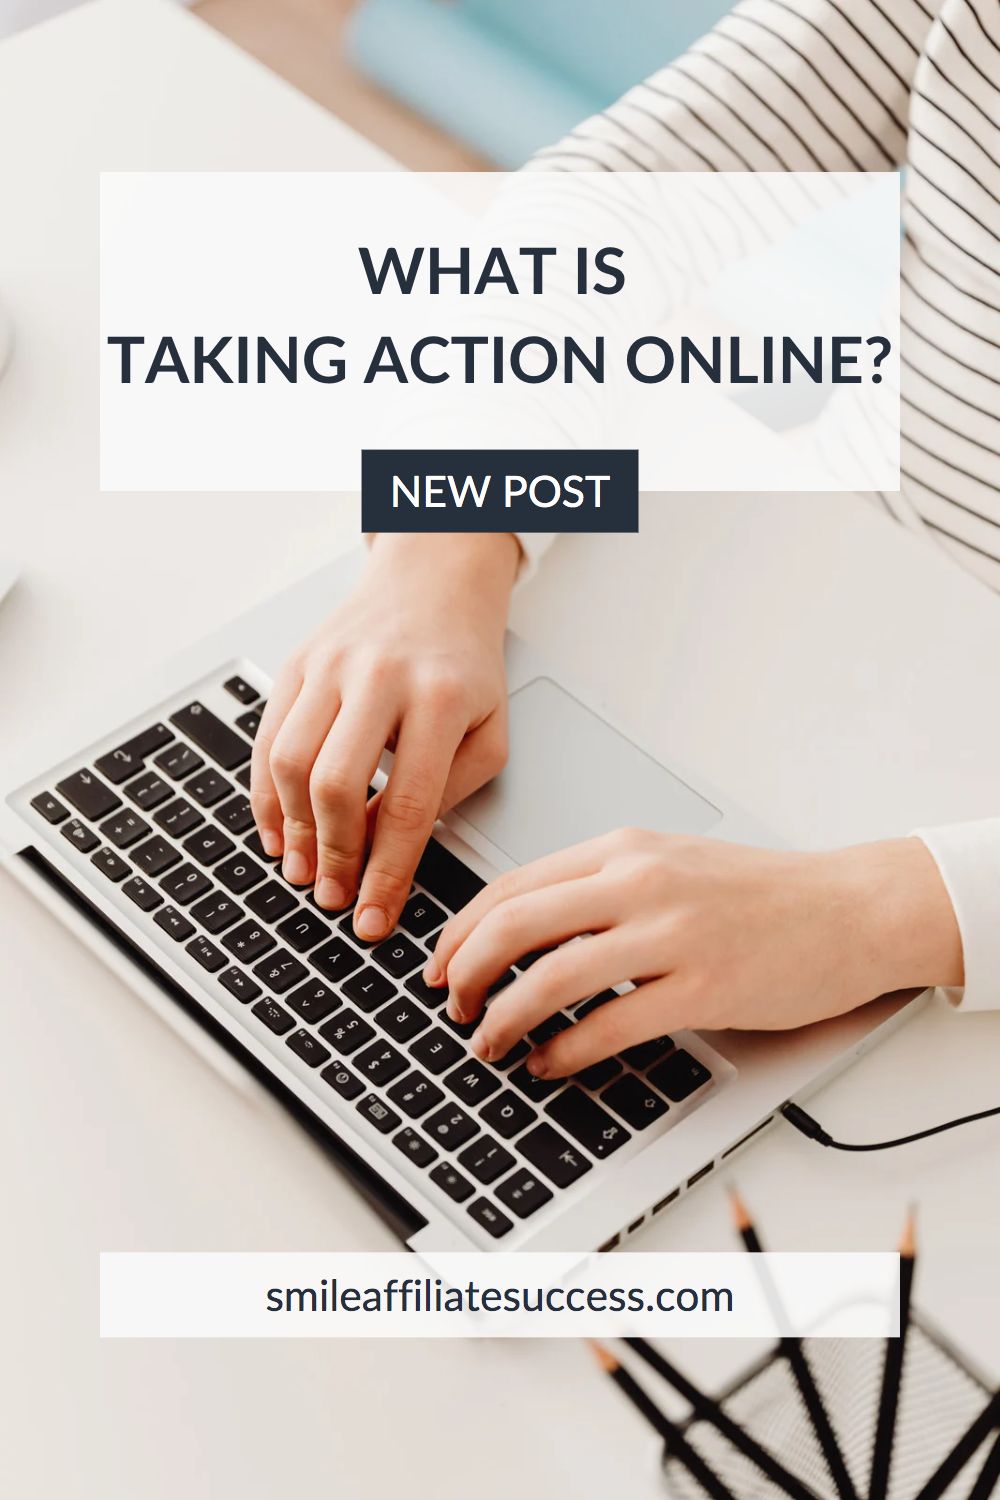 What Is Taking Action Online?